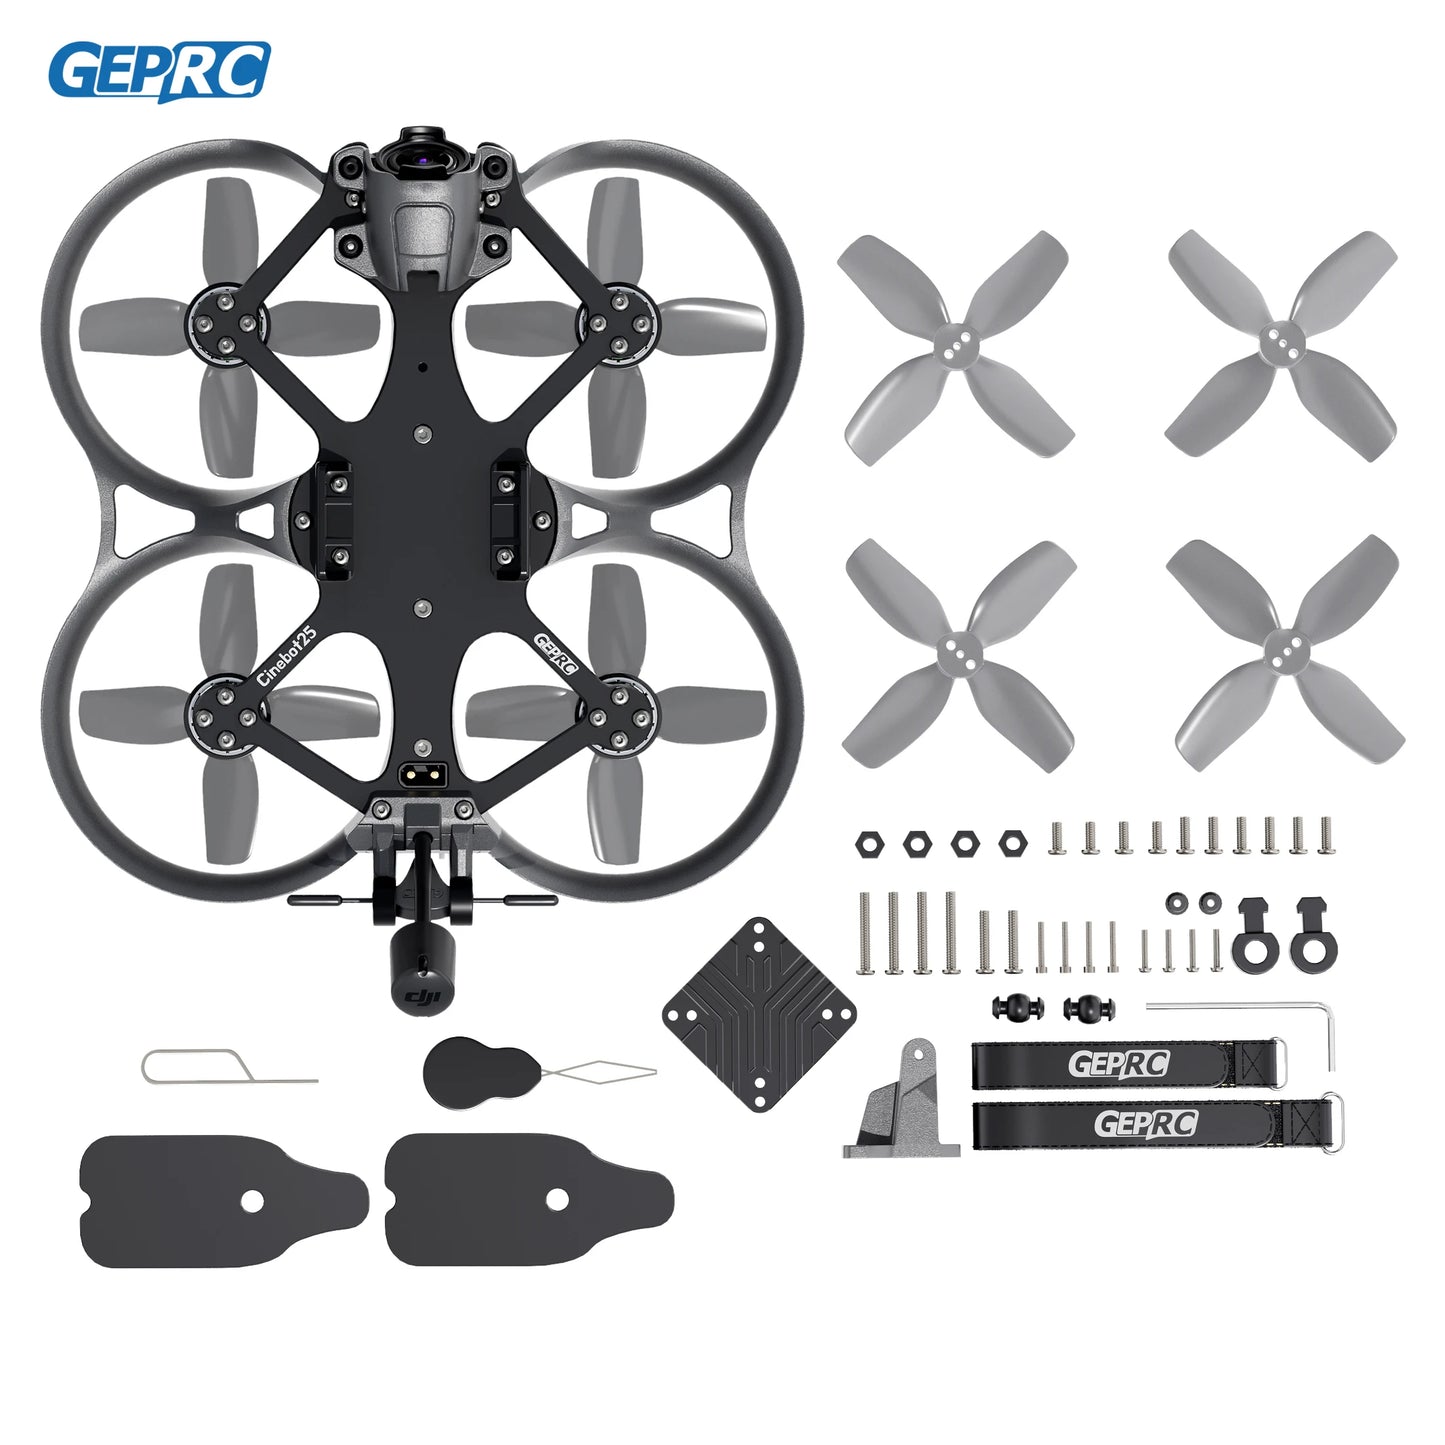 GEPRC Cinebot25 HD O3 FPV Drone - 2.5inch Racing Freestyle Quadcopter TAKER G4 45A AIO FC SPEEDX2 1404 4600KV Motor RC 128K PWM